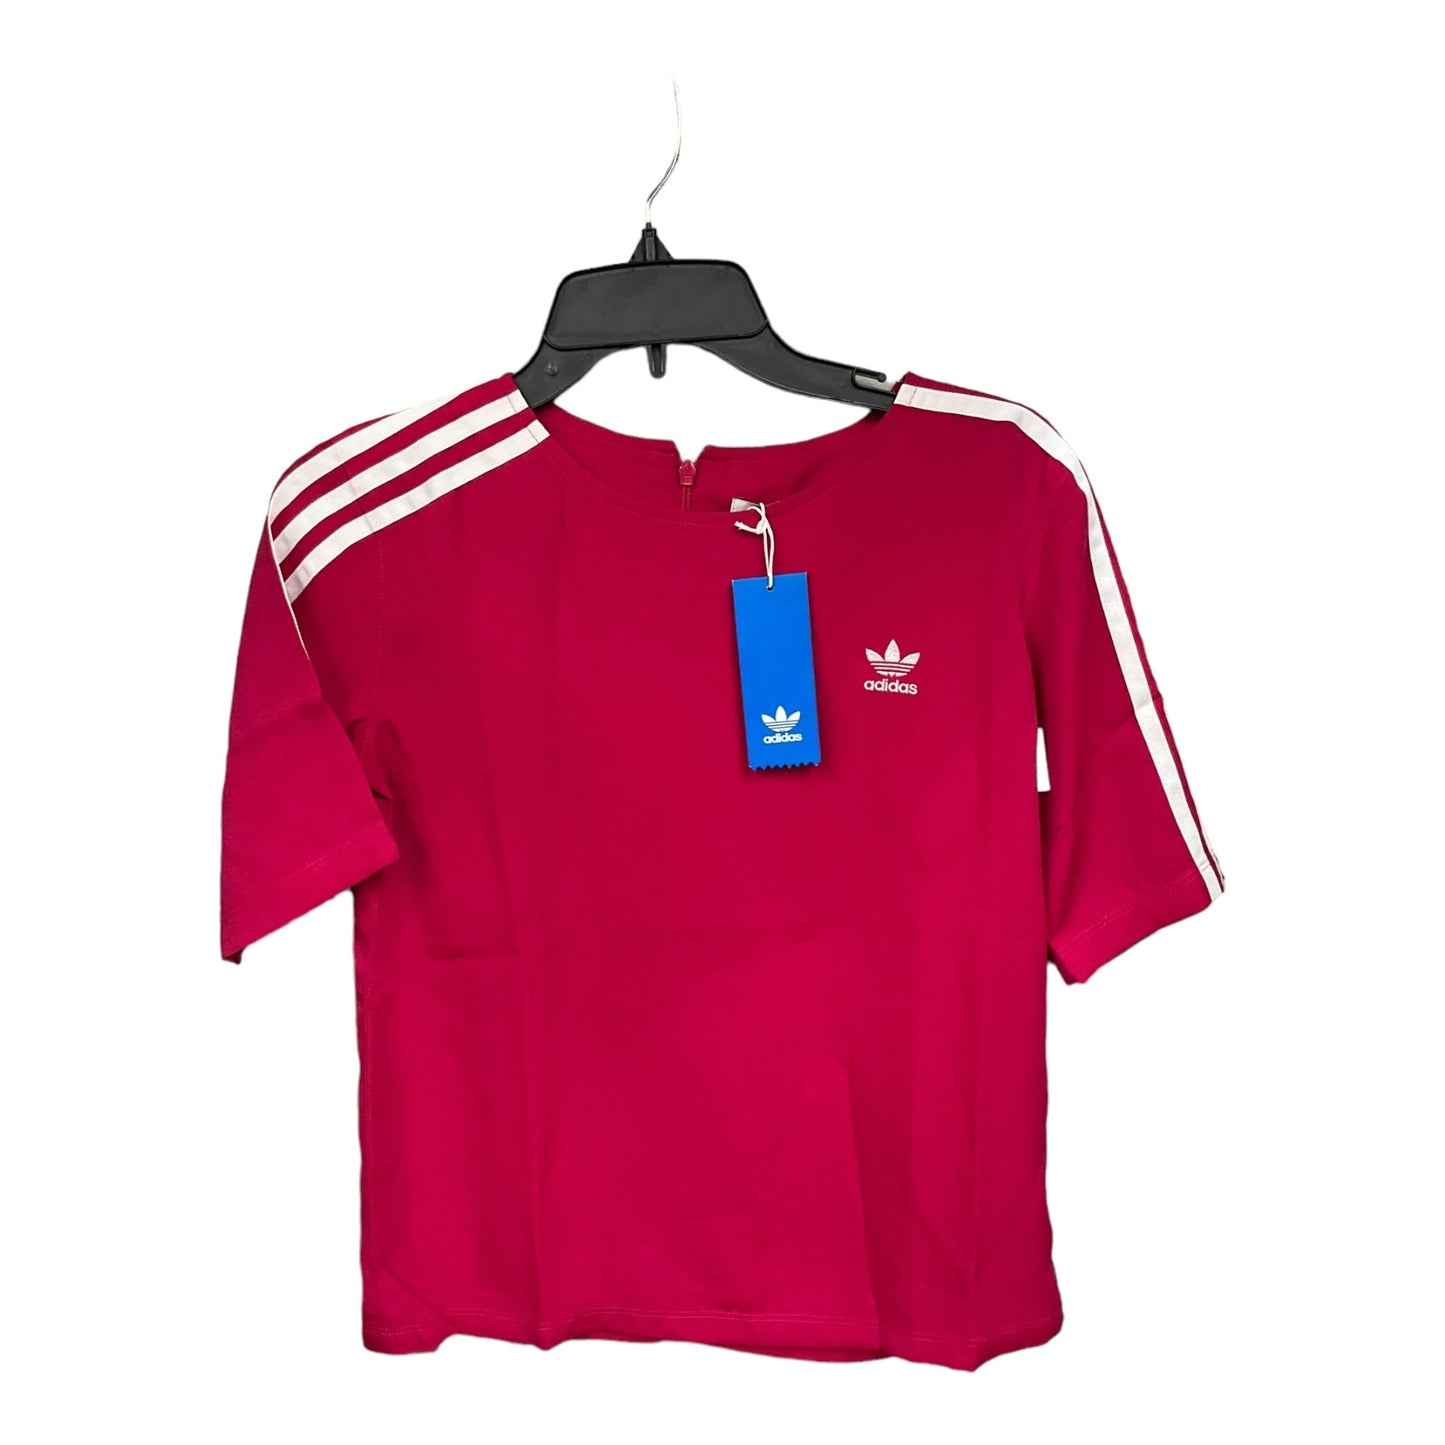 Pink & White Athletic Top Short Sleeve Adidas, Size M